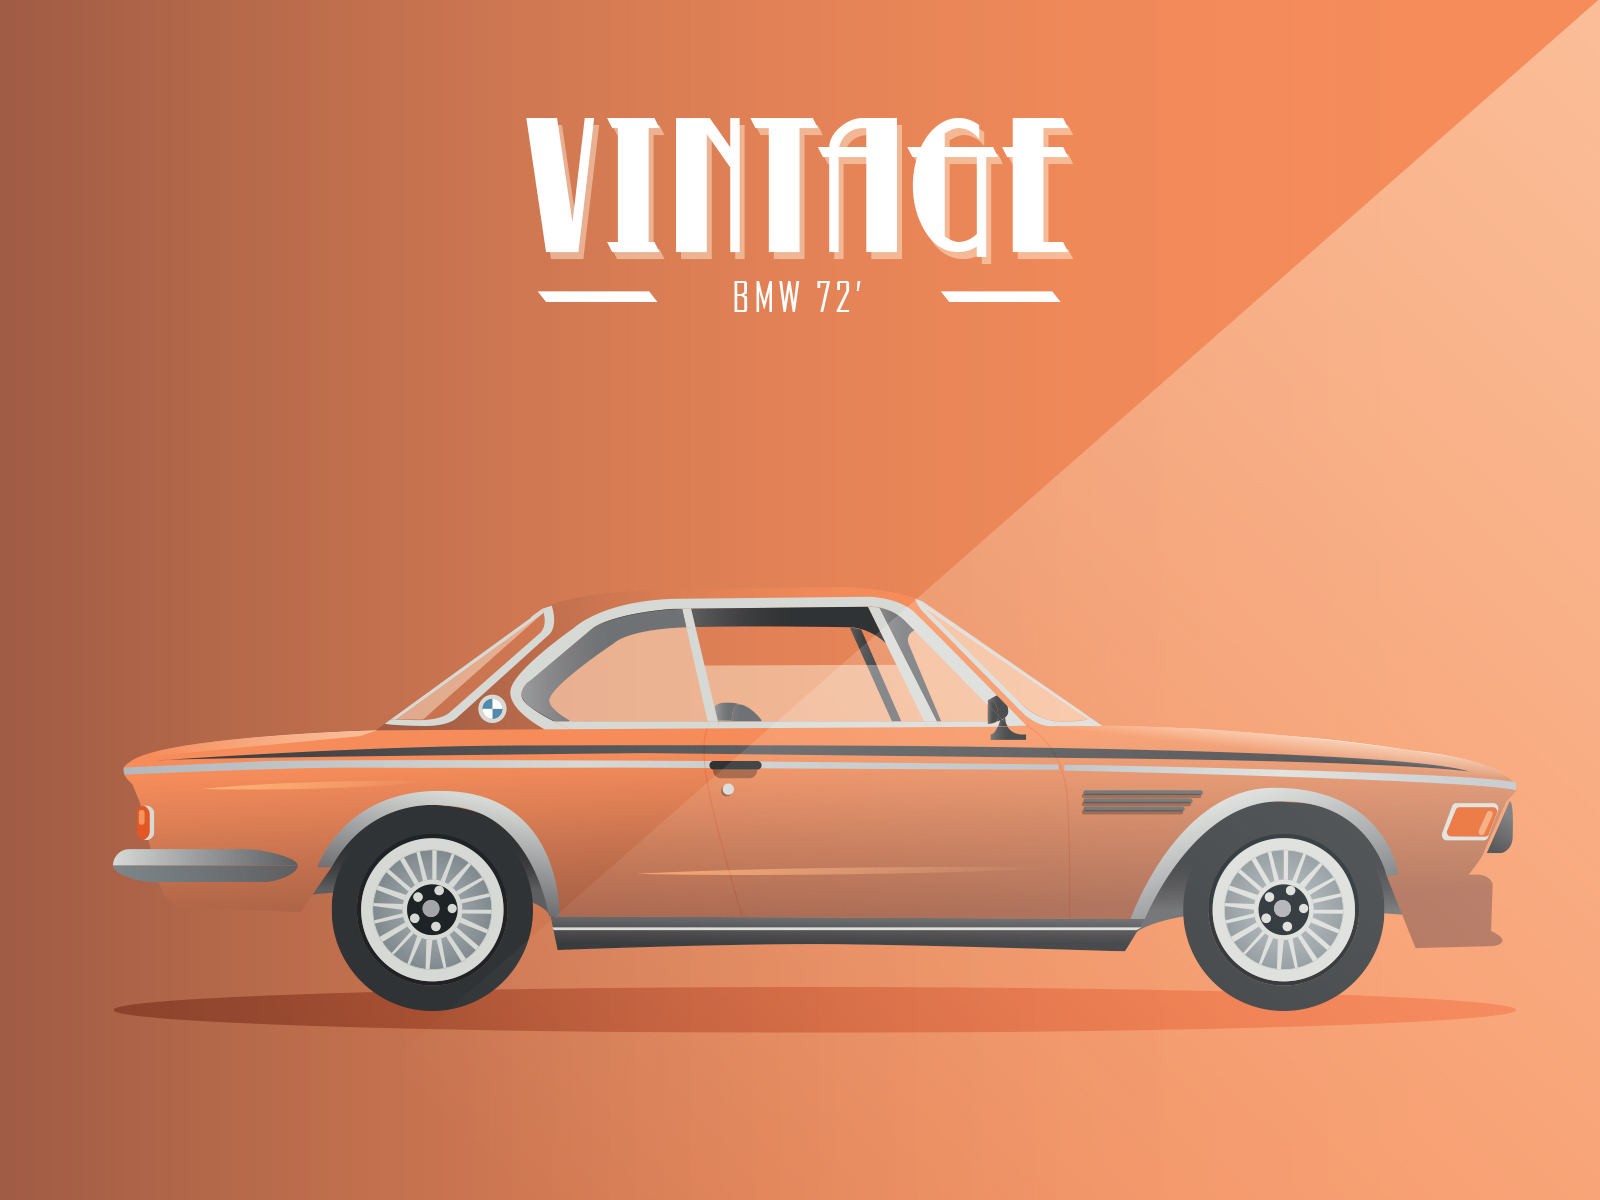 Vintage Cars - BMW 72 by Filippo Musso on Dribbble